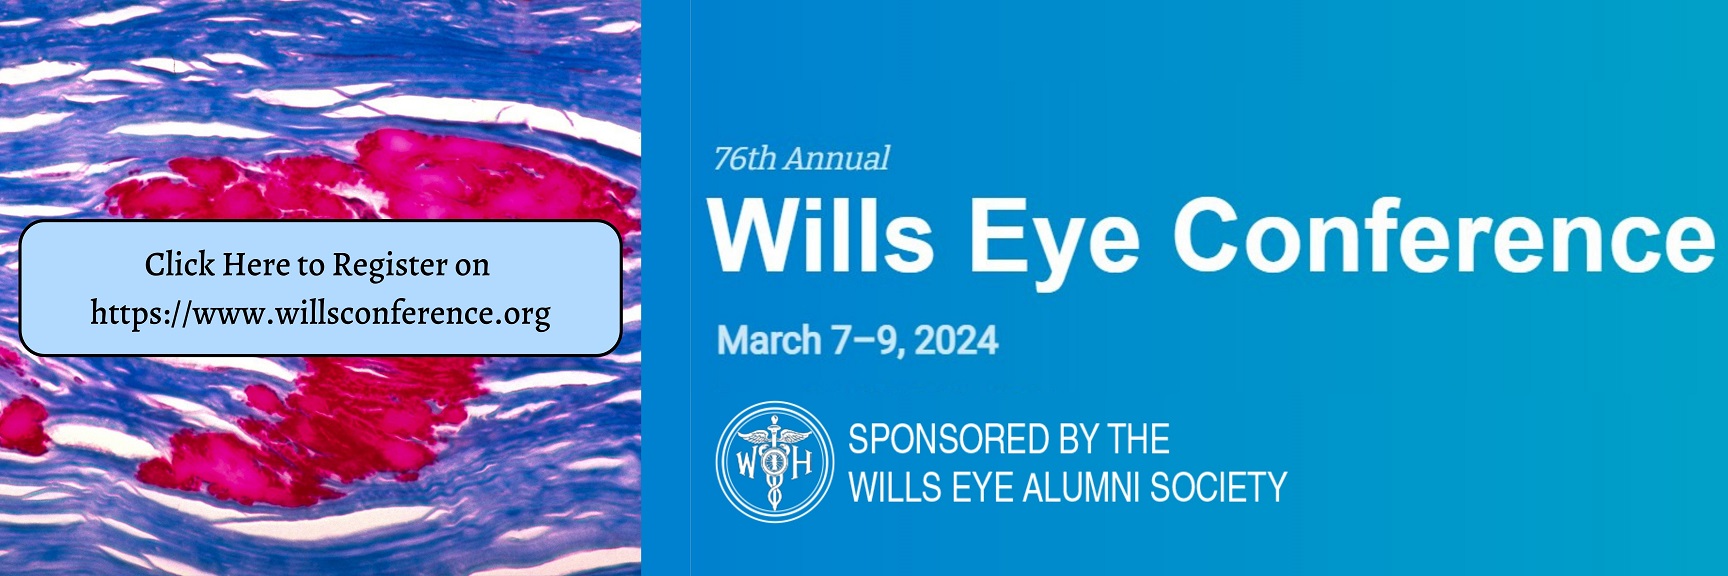 Wills Eye Hospital CME Continuing Education